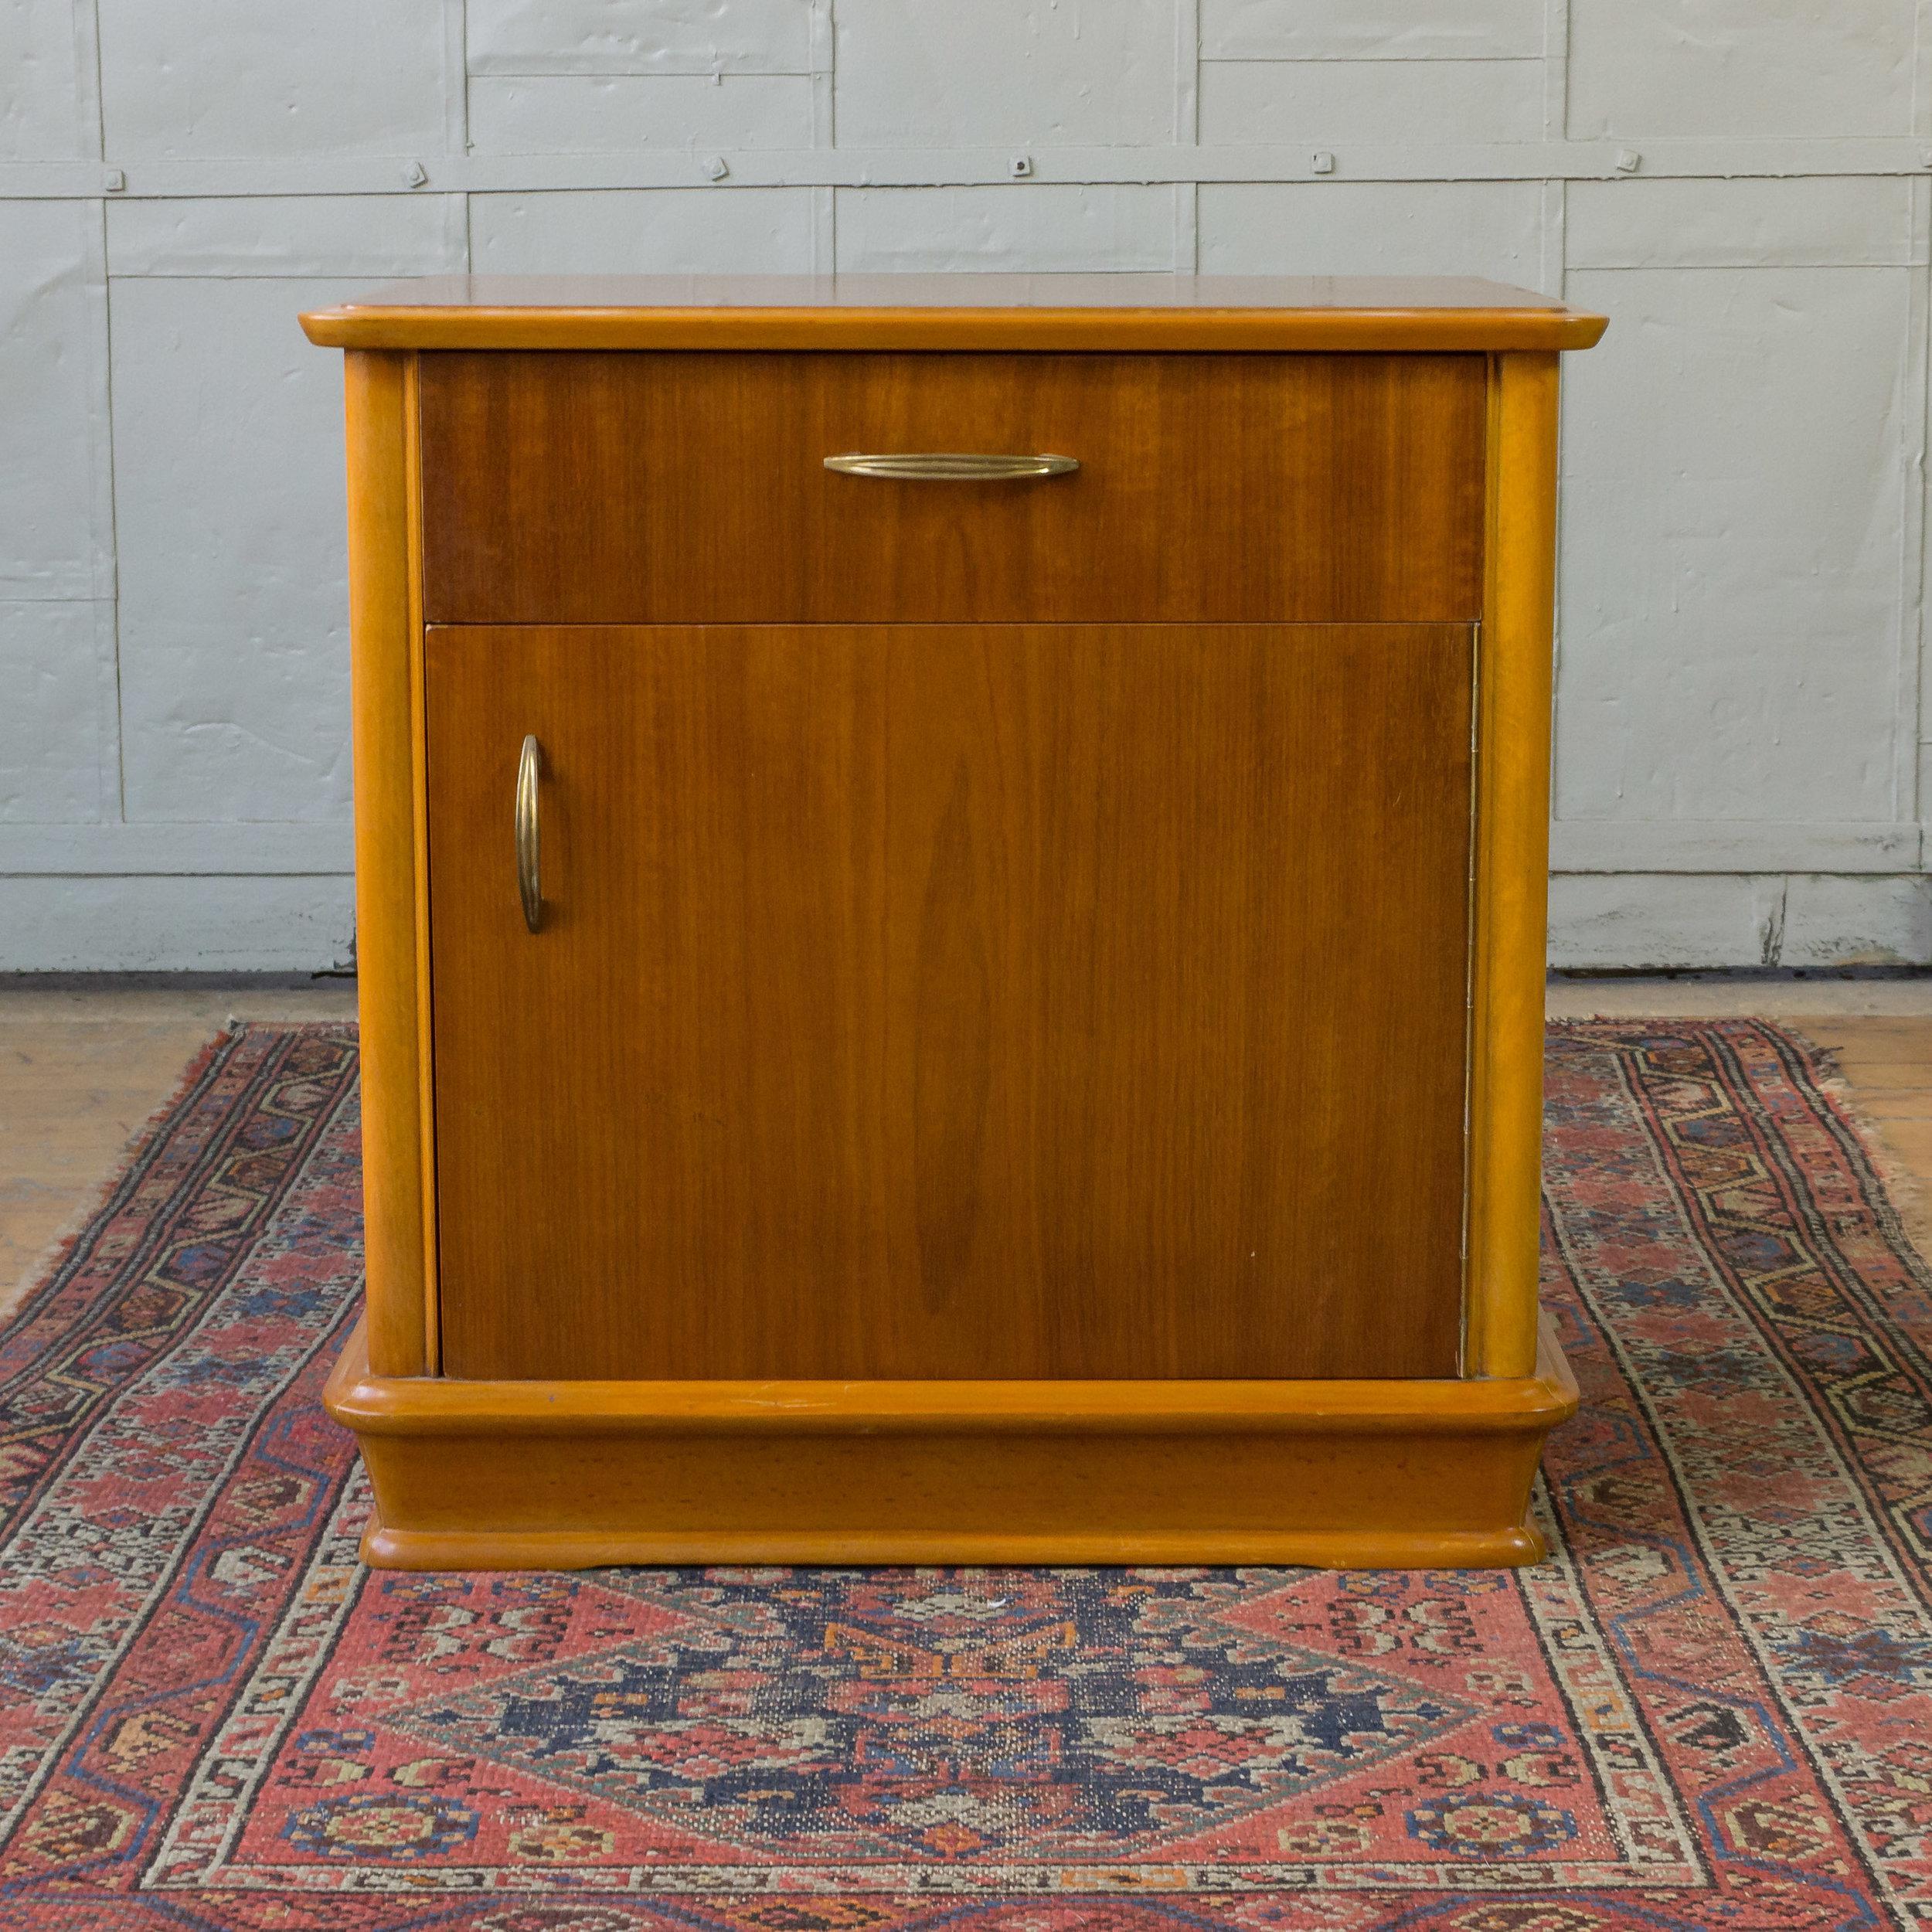 Handsome pair of French midcentury mahogany veneered nightstands that have a drawer and door with original hardware. Very good condition, recently restored.